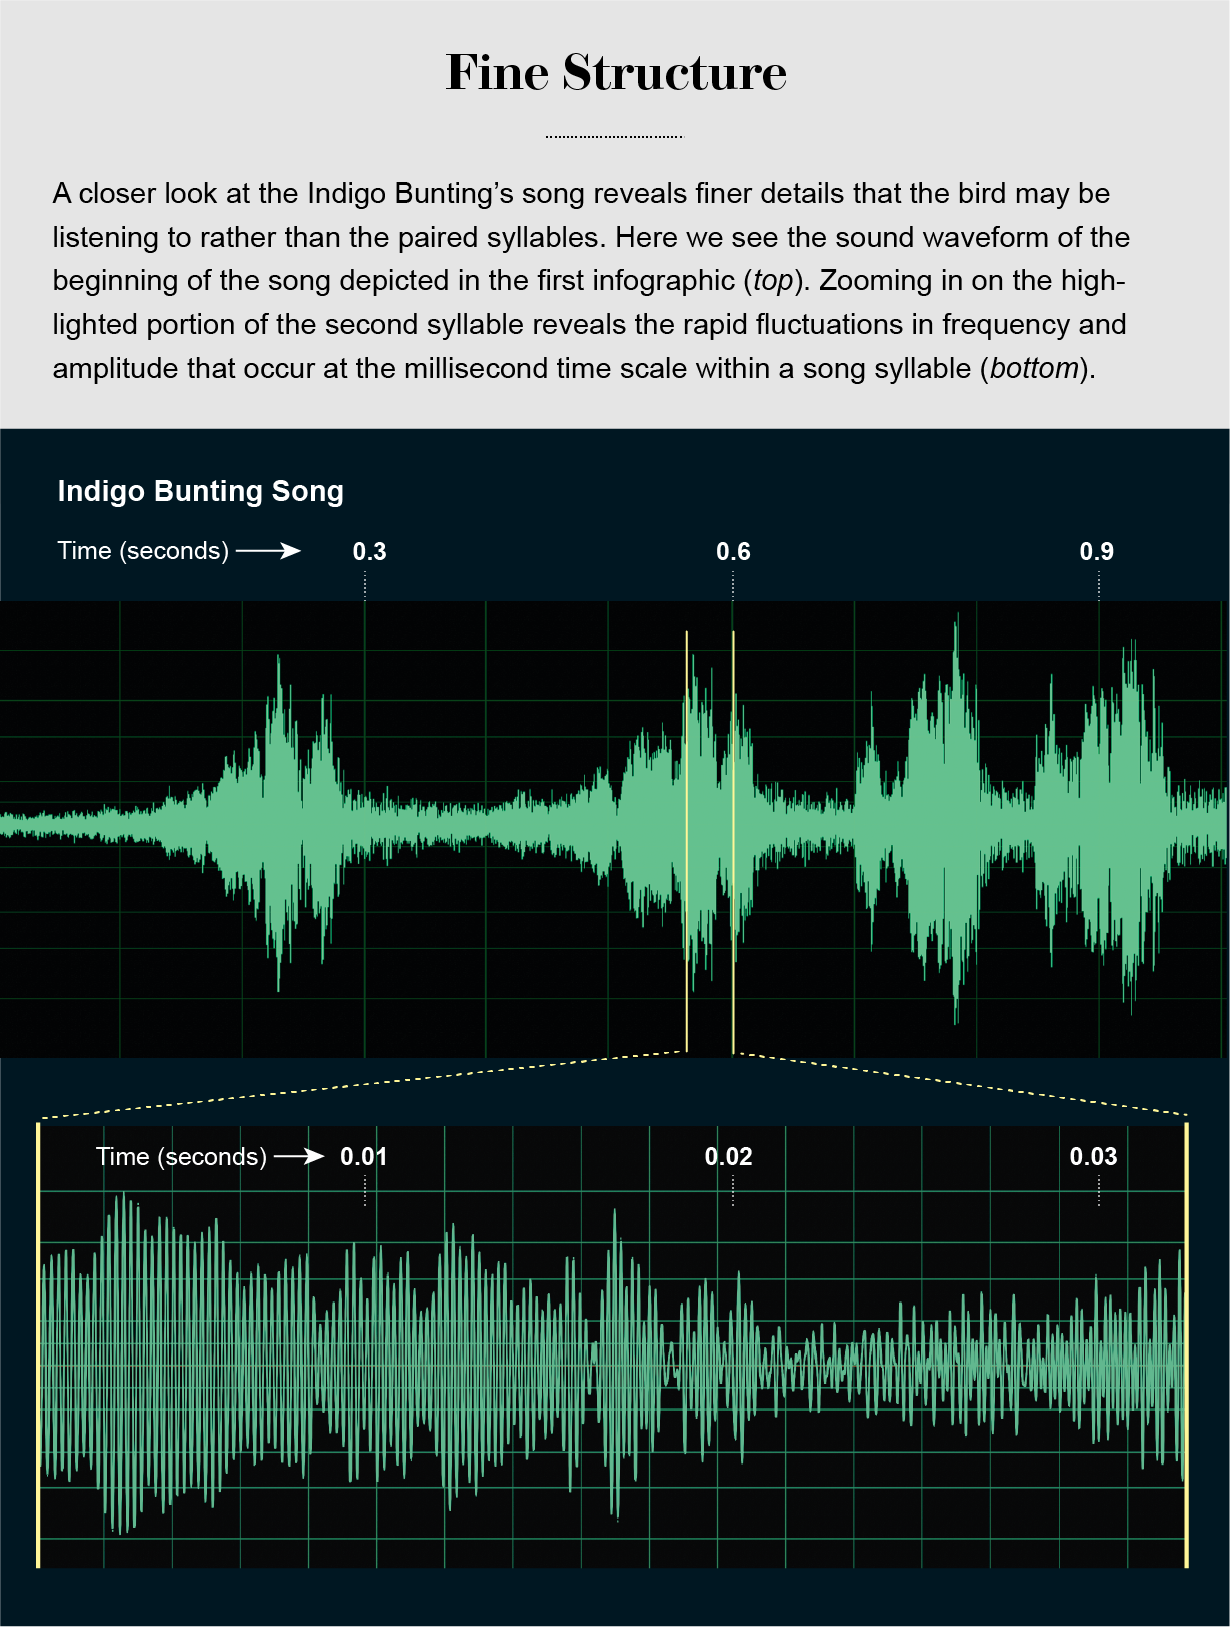 Enlarged section of Indigo Bunting song waveform shows rapid frequency and amplitude fluctuations within a syllable.